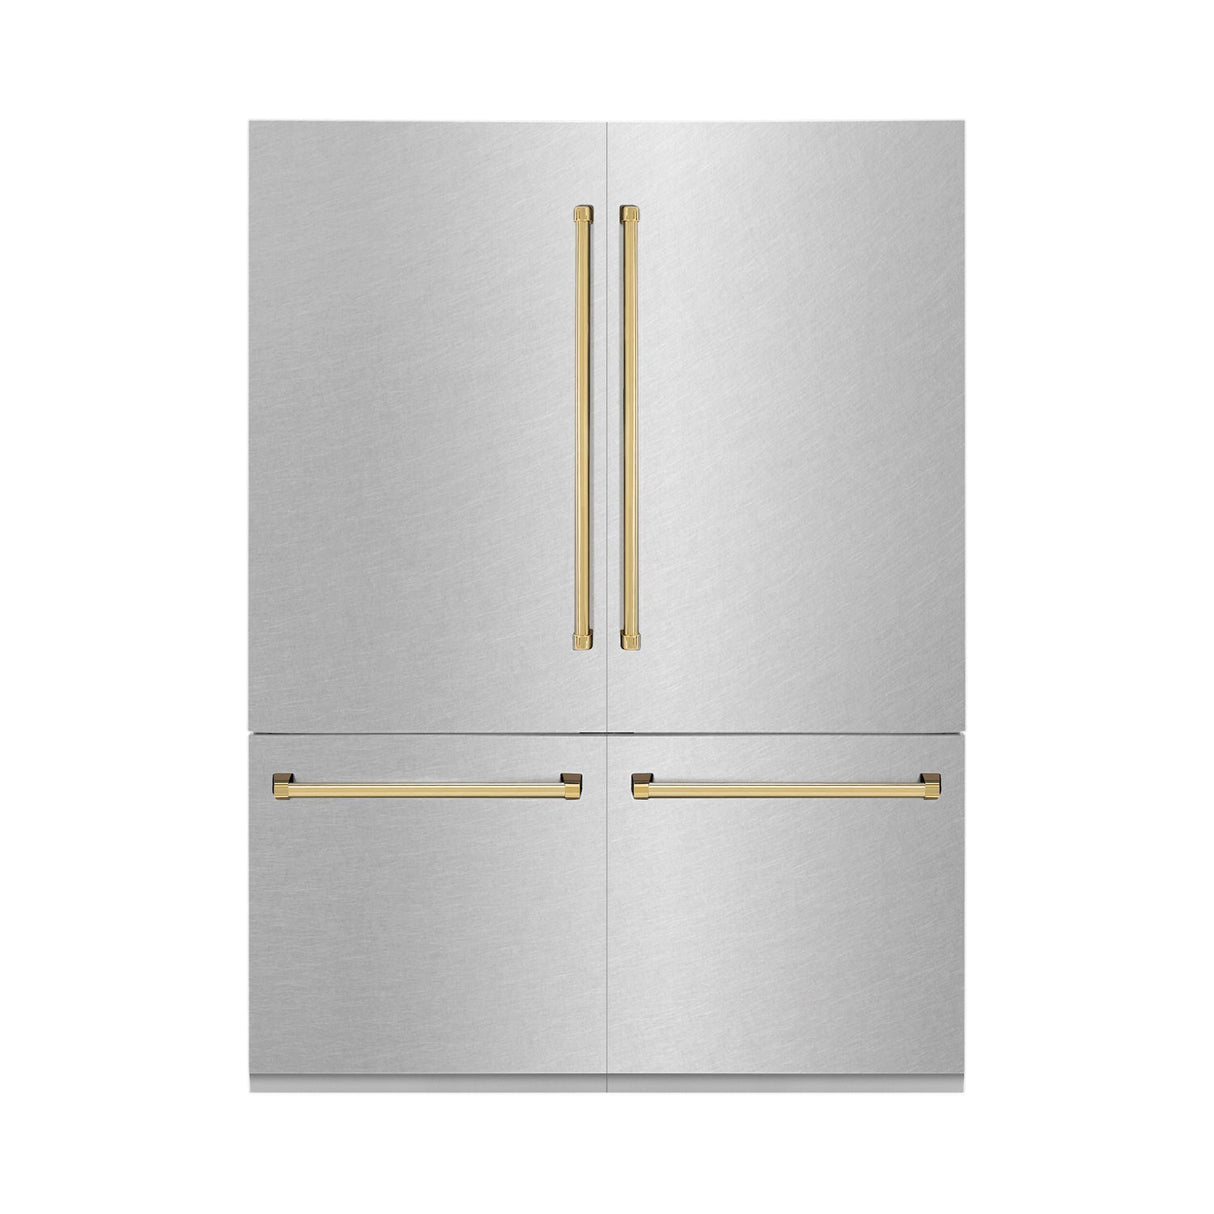 ZLINE Autograph Edition 60 in. 32.2 cu. ft. Built-in 4-Door French Door Refrigerator with Internal Water and Ice Dispenser in Fingerprint Resistant Stainless Steel with Polished Gold Accents (RBIVZ-SN-60-G)